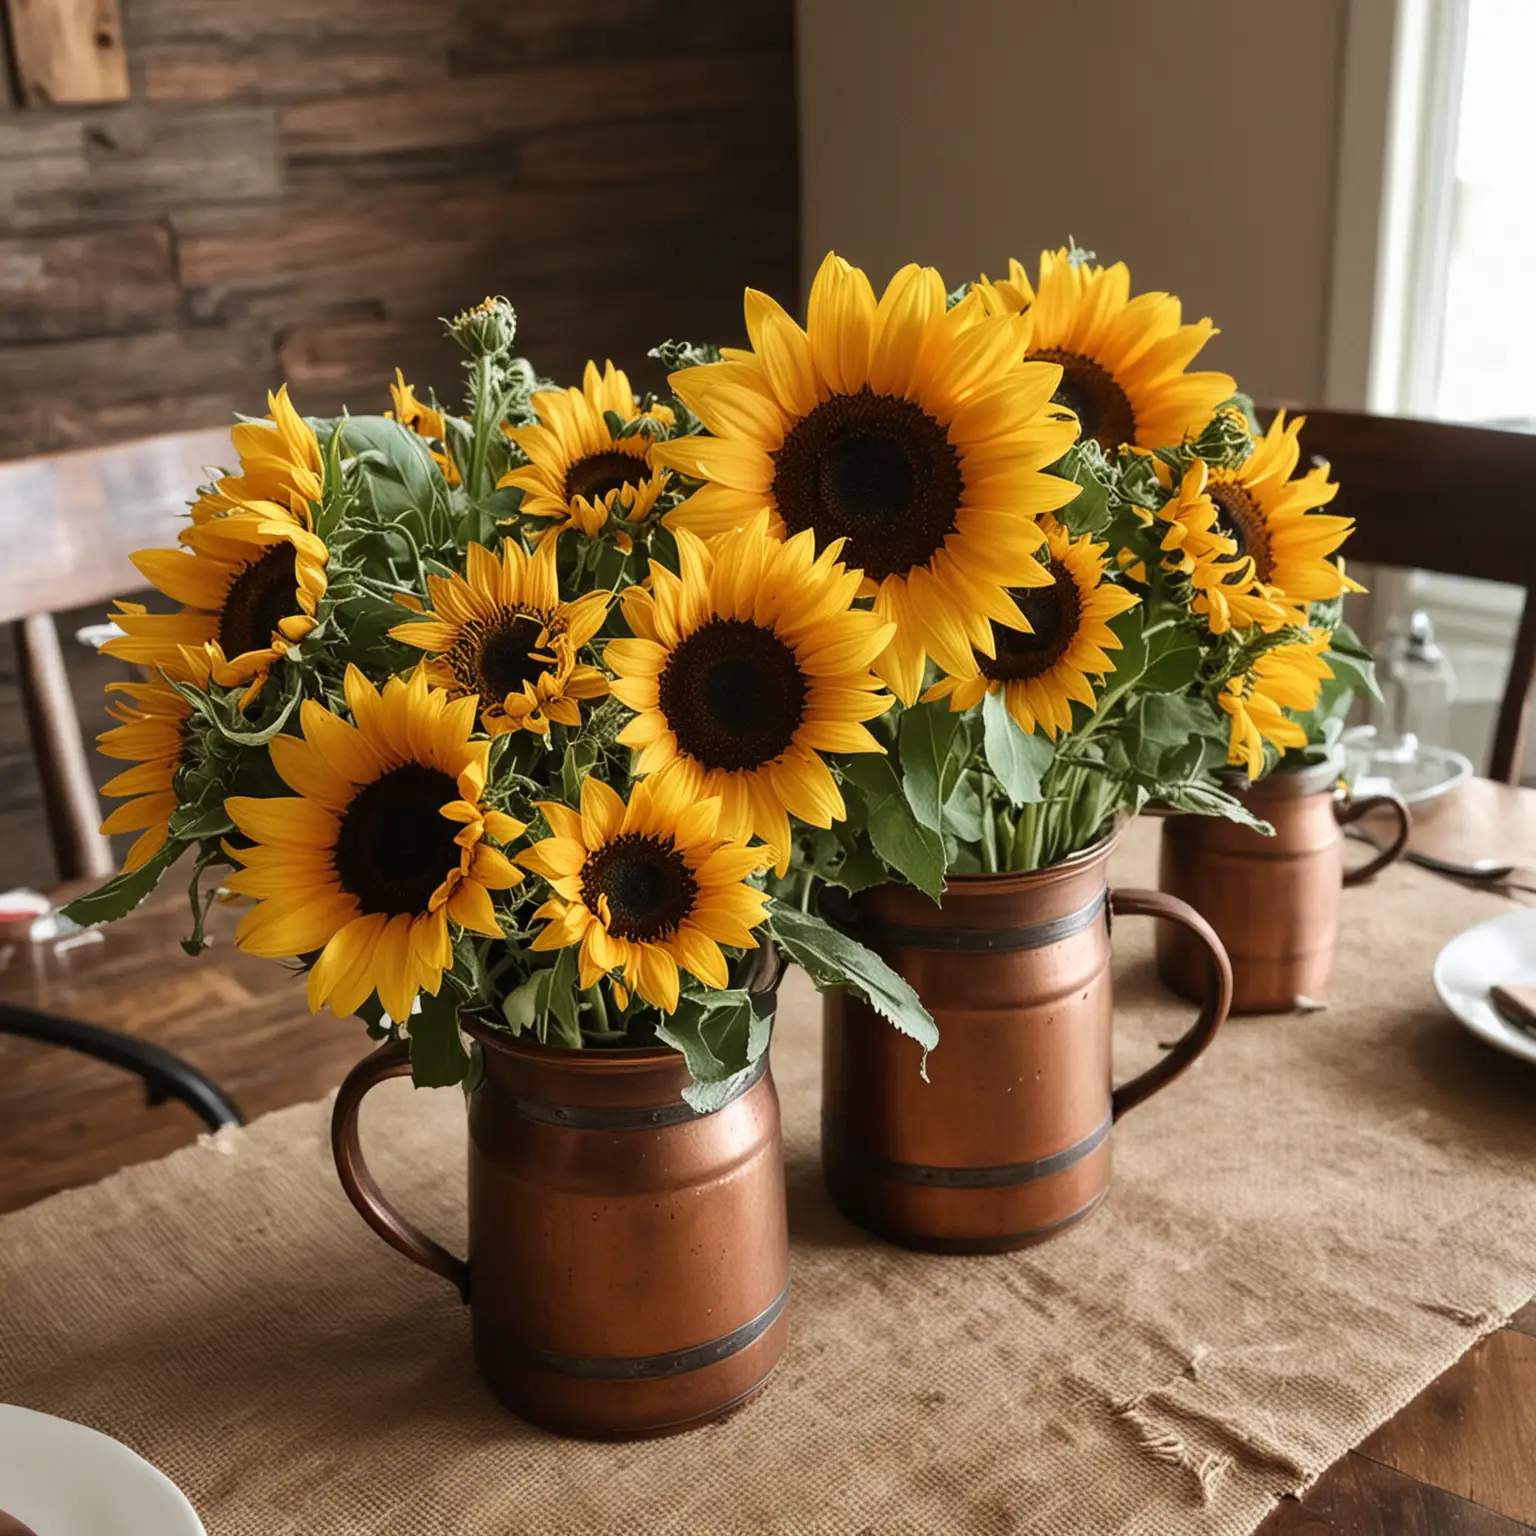 Rustic-Sunflower-Centerpiece-in-Copper-Mugs-for-Charming-Table-Decor